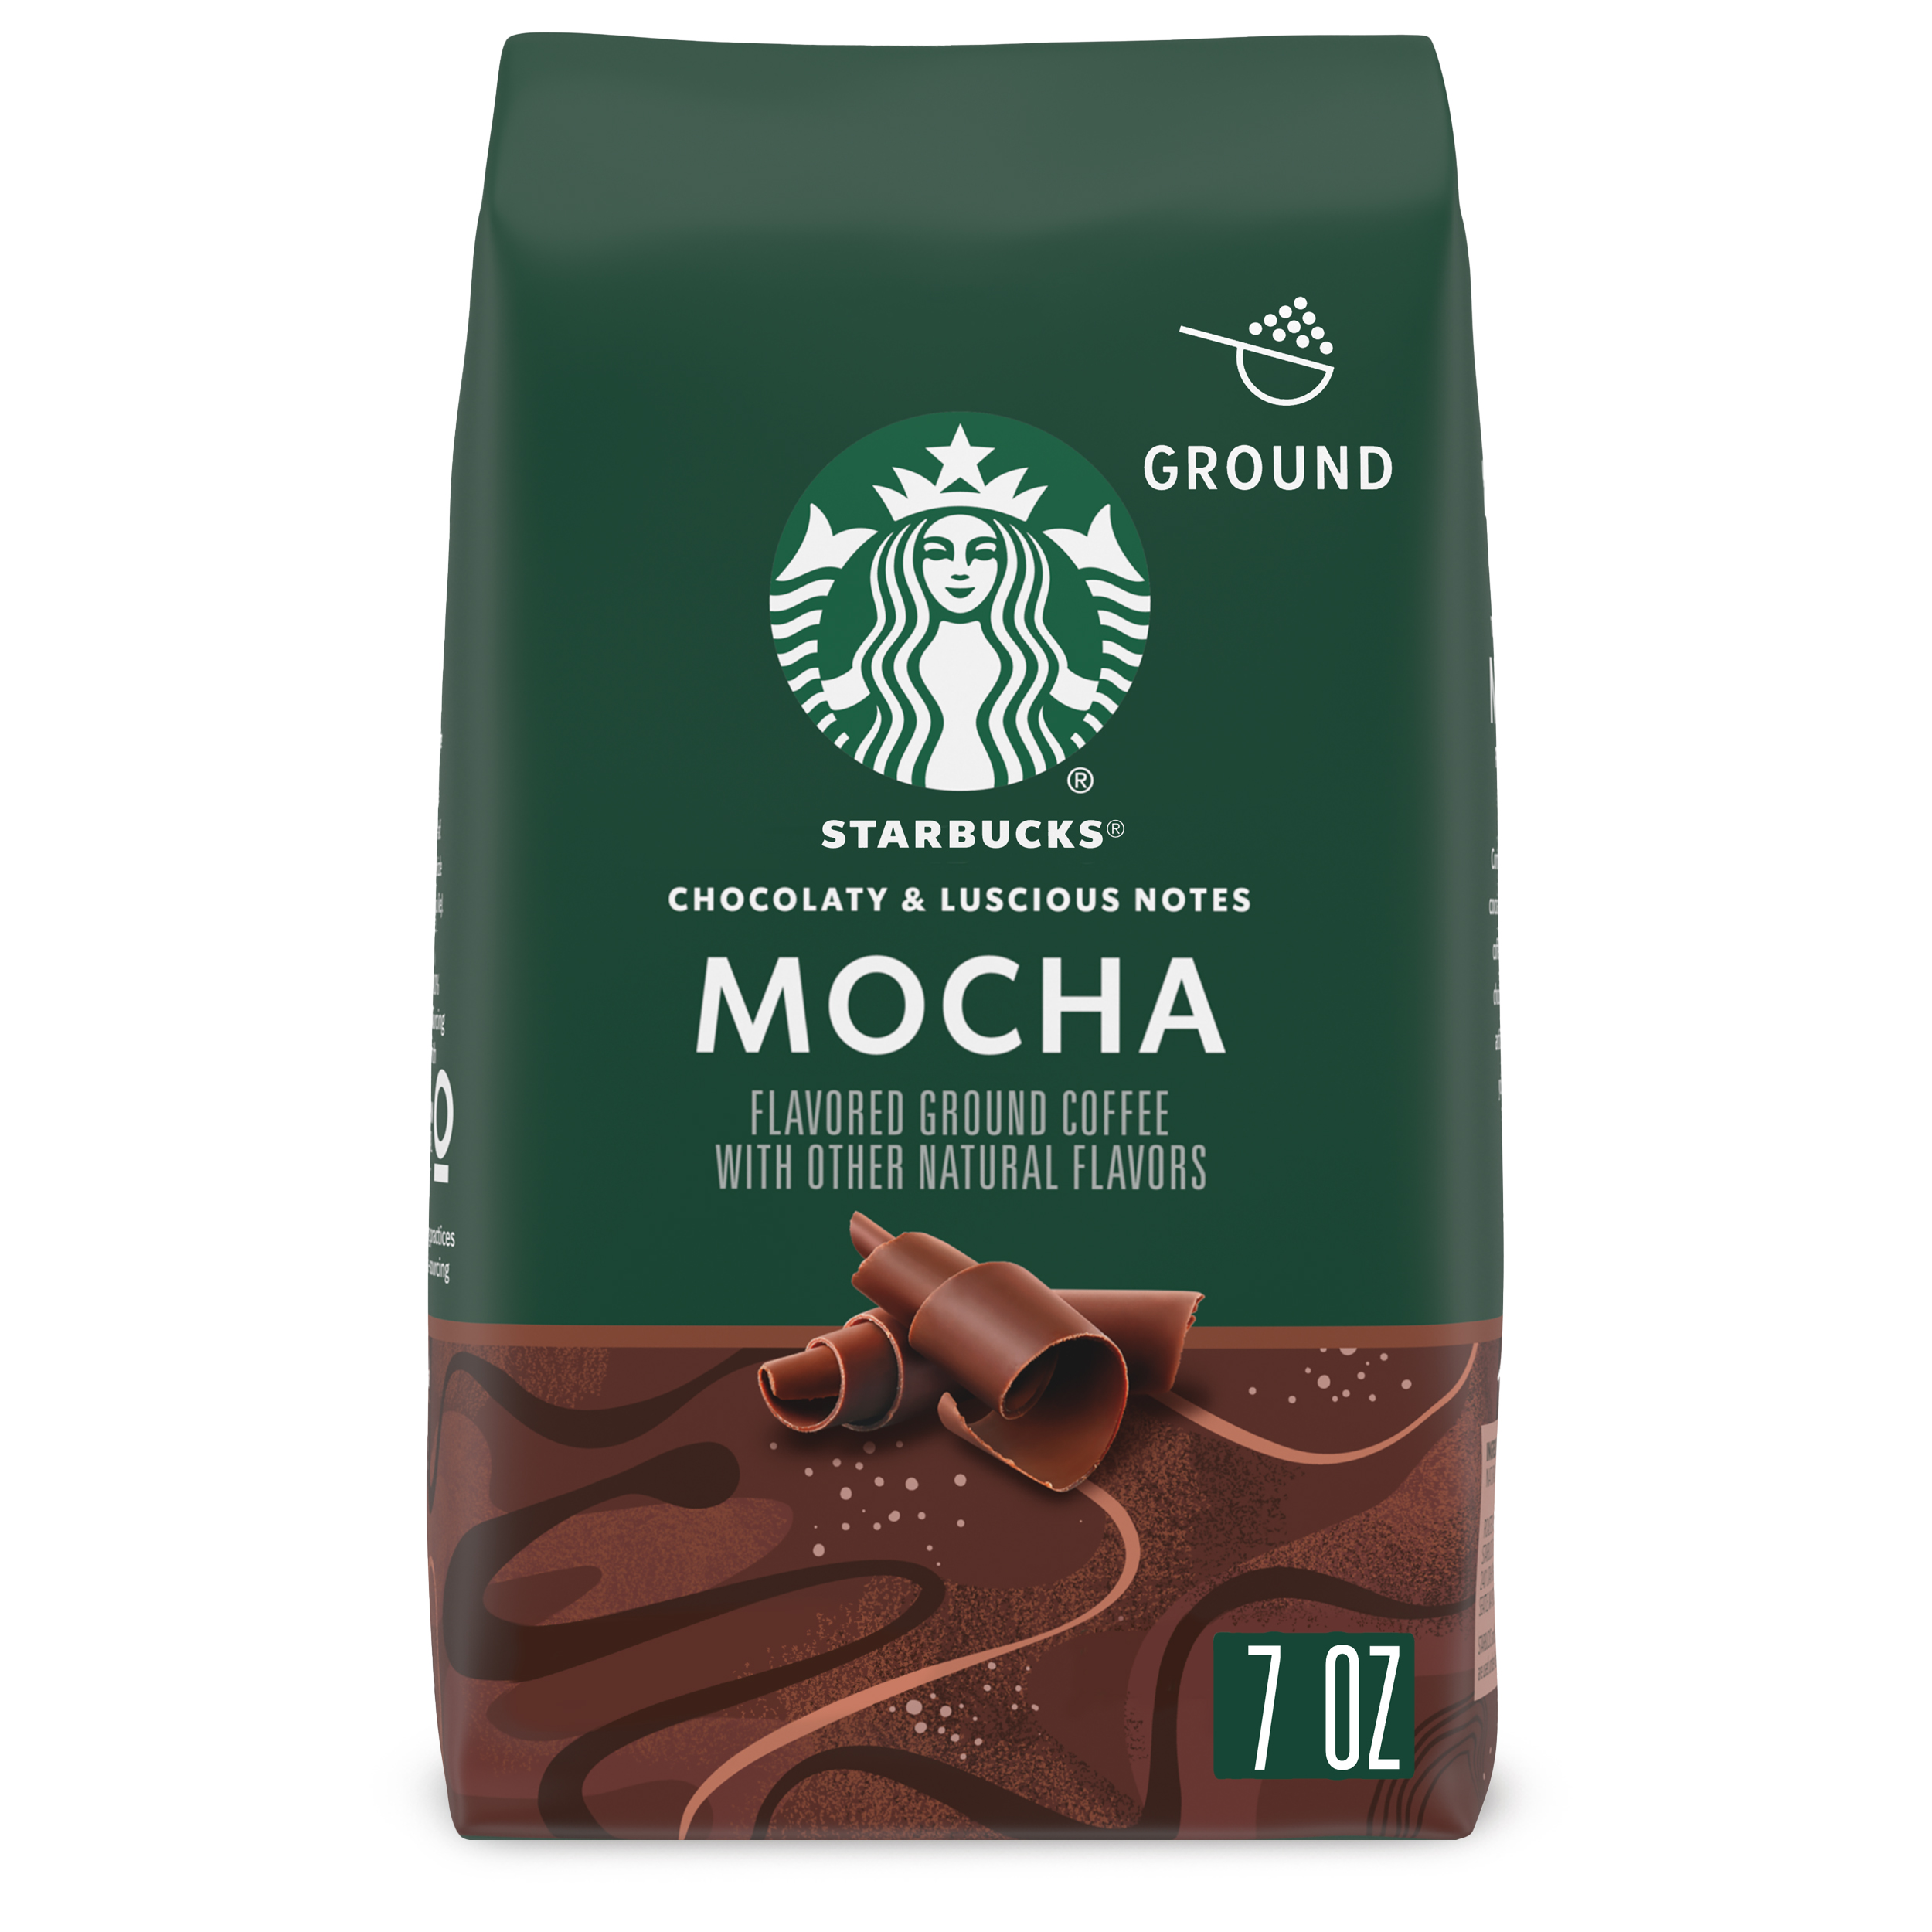 Starbucks Mocha Flavored, Ground Coffee, Naturally Flavored, 7 oz - image 1 of 8